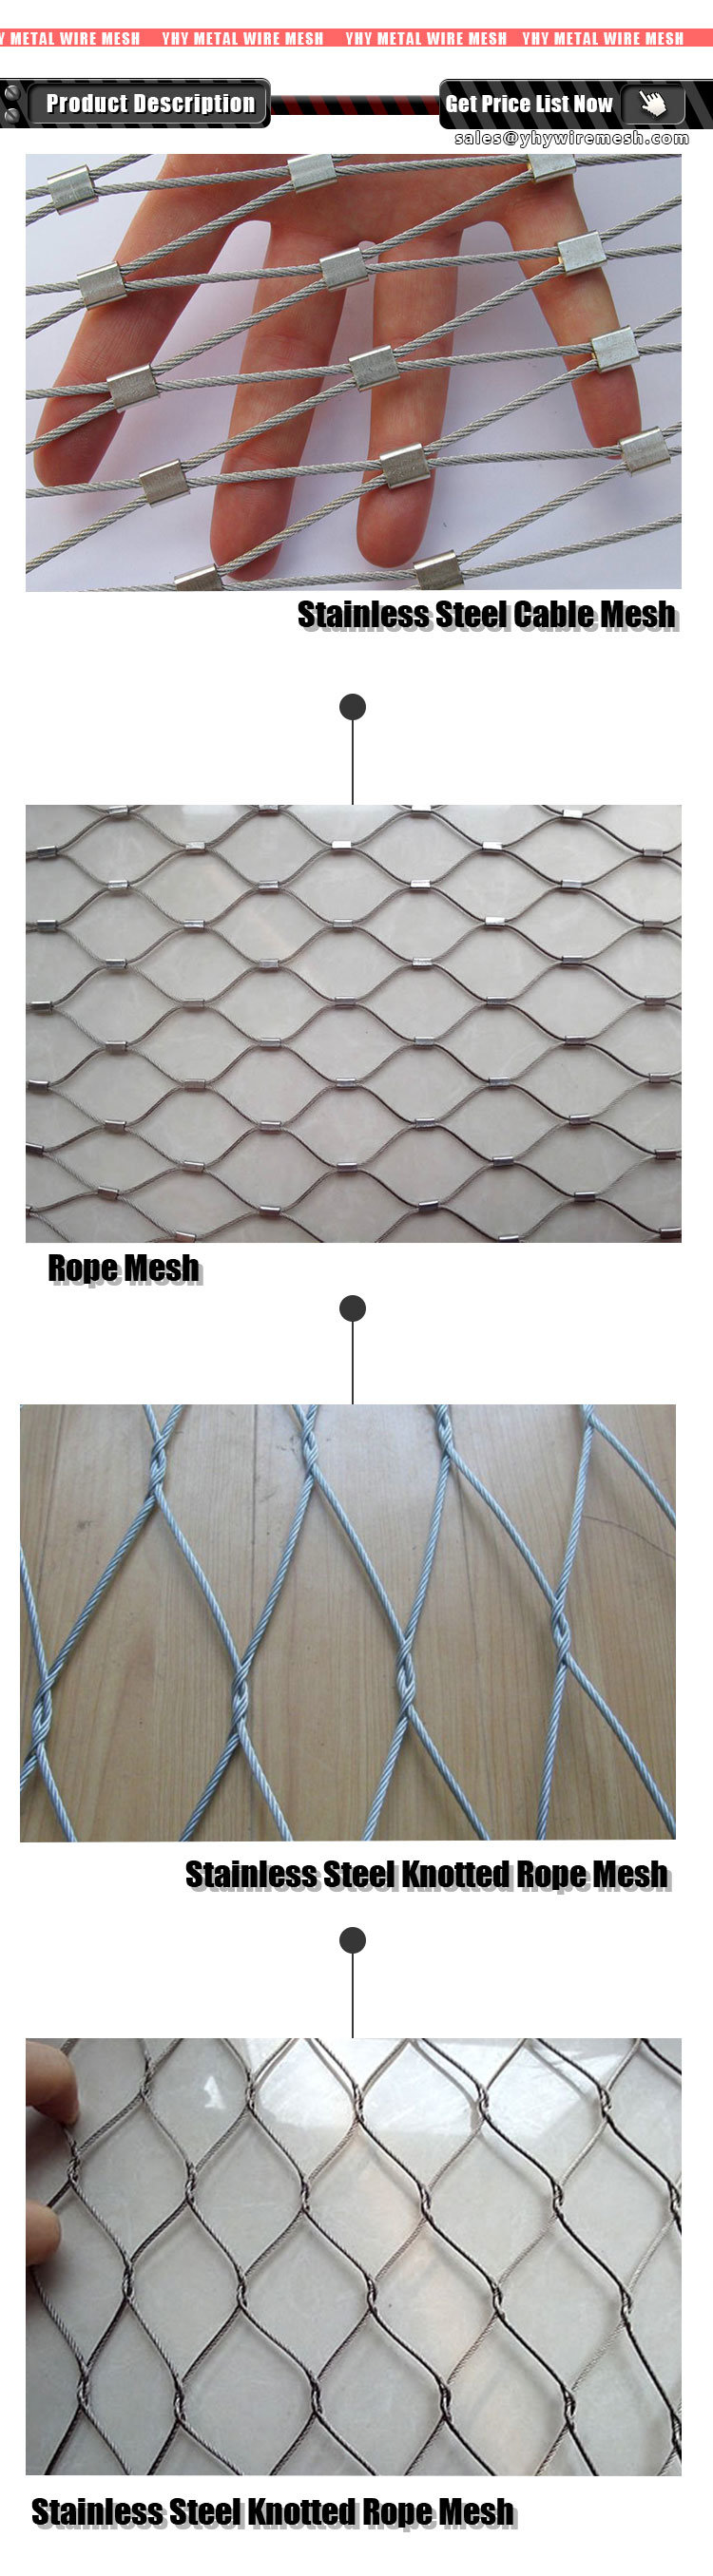 AISI 316 Stainless Steel Decor Wire Rope.